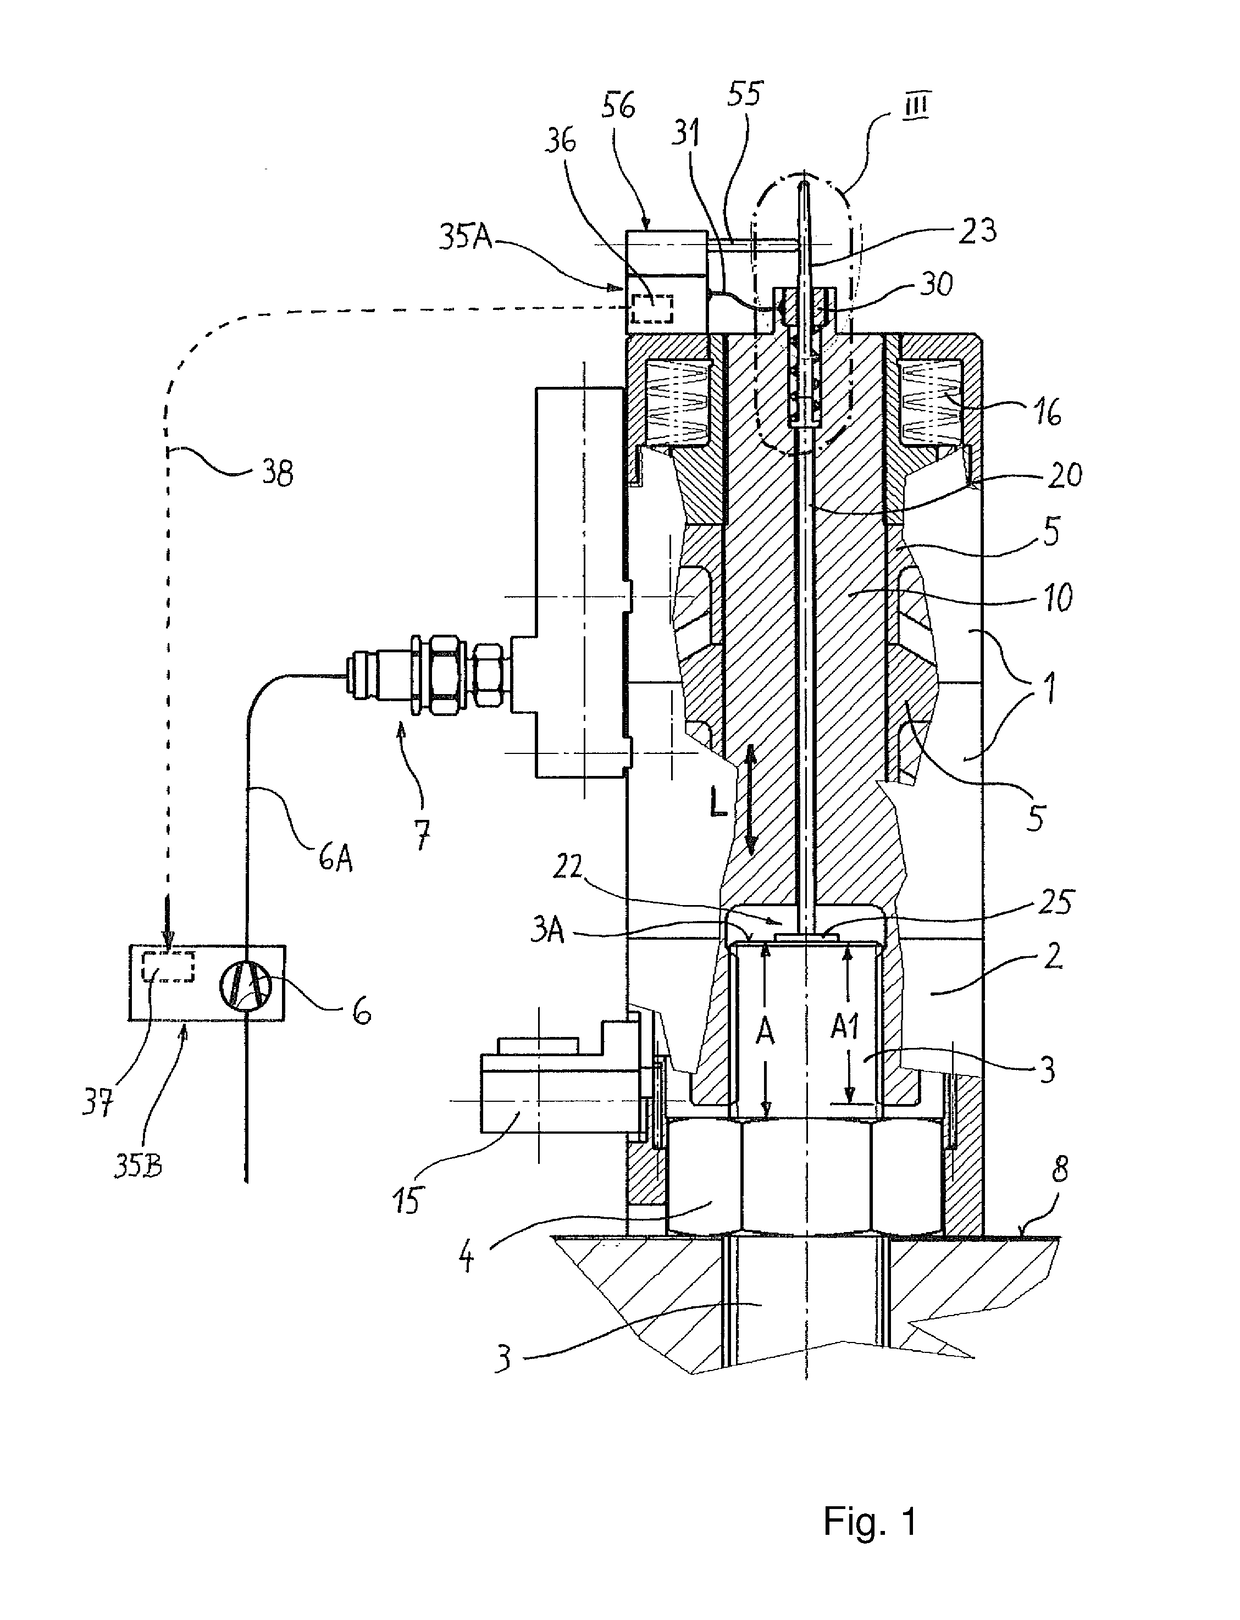 Tensioning Device for Extending a Threaded Bolt